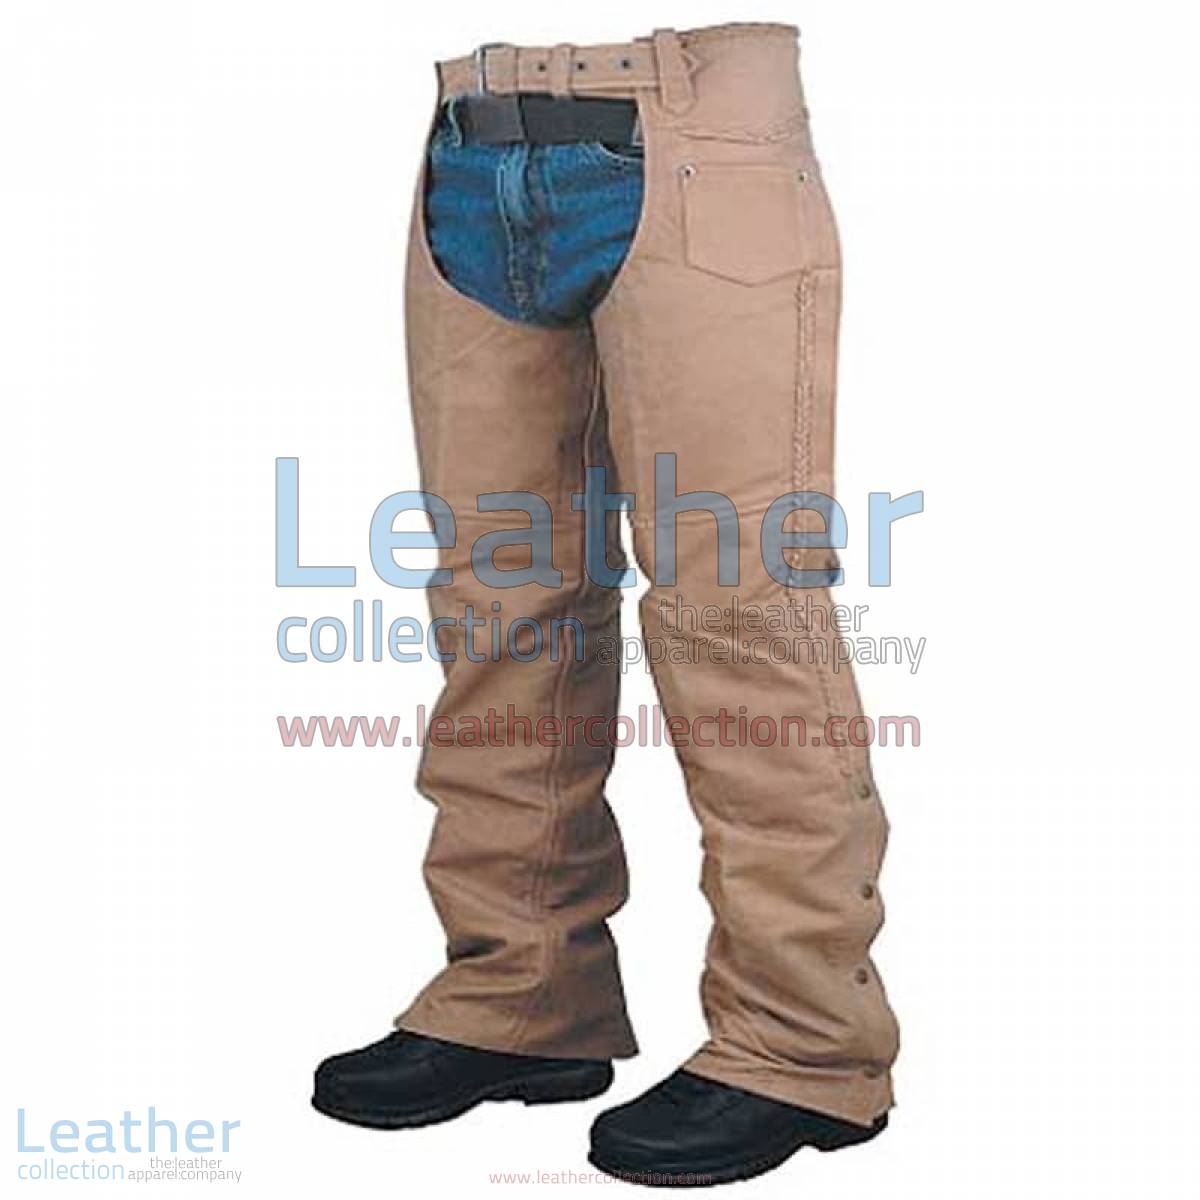 Leather Braided Chaps For Men | chaps for men,leather chaps for men